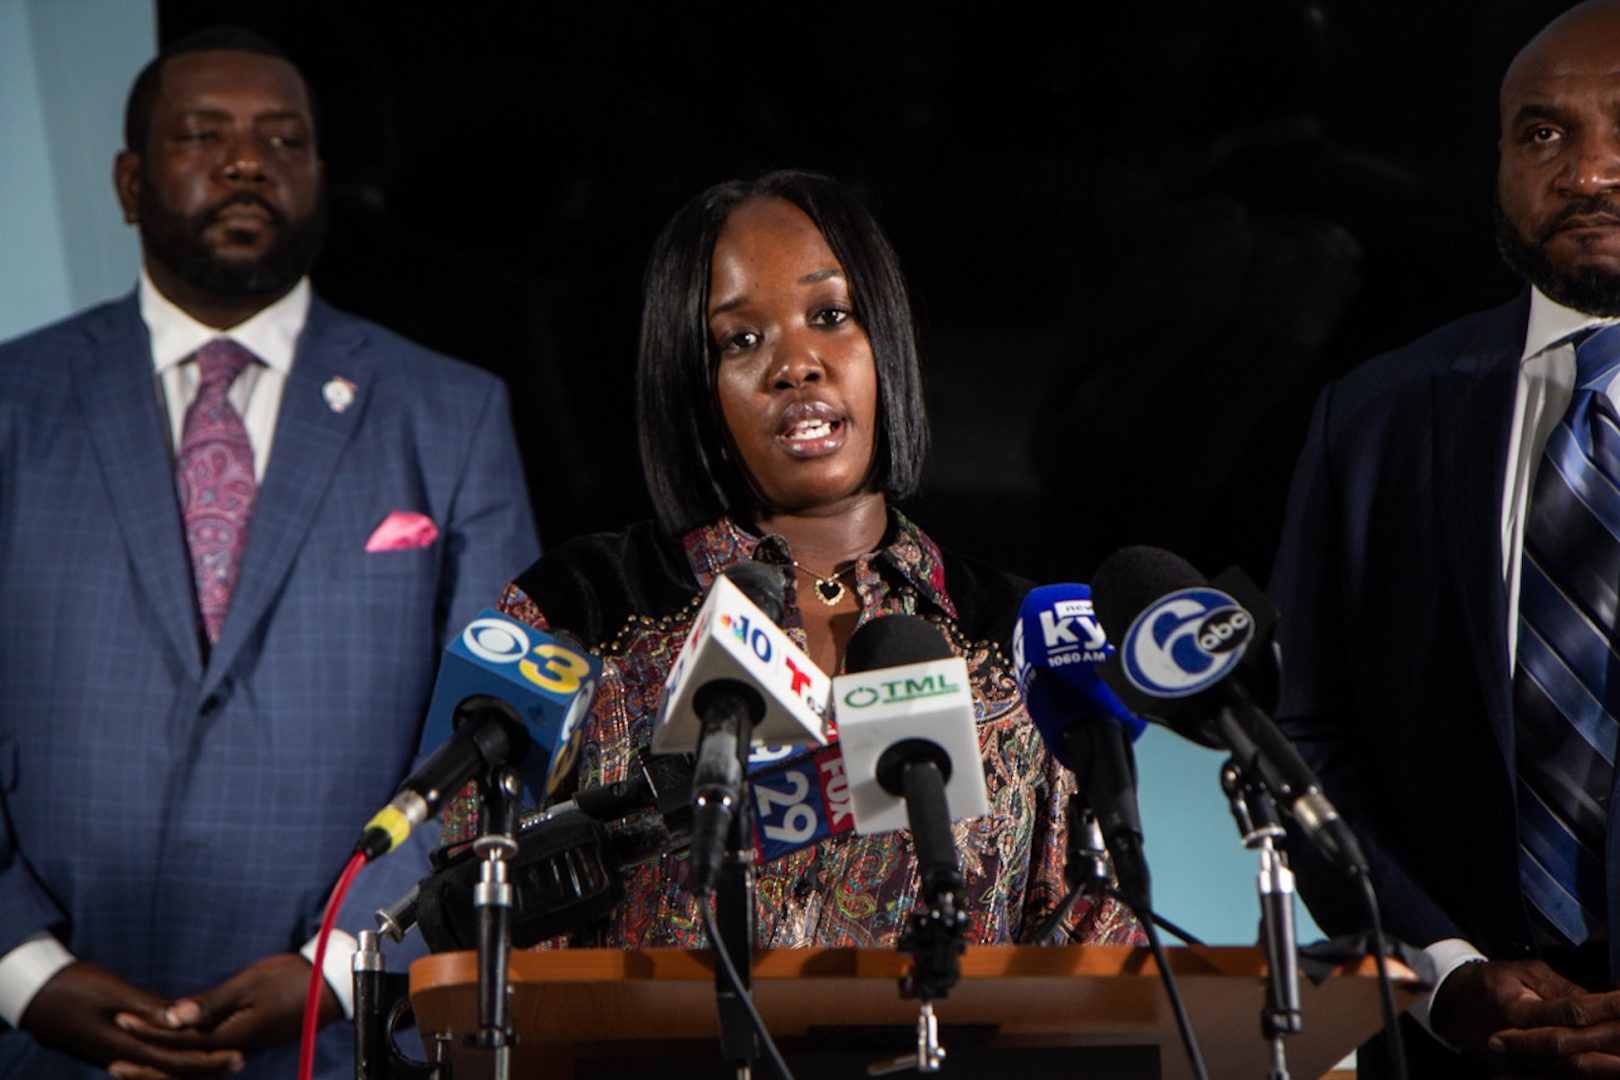 Rickia Young, a mother who was assaulted when her SUV was overrun with Philadelphia police at a social justice protest in October of 2020, won a pre-settlement of 2 million dollars from the City of Philadelphia. Young talked about the emotional damages at a press conference announcing the pre-settlement at the Mincey Fitzpatrick Ross law firm on September 14, 2021.